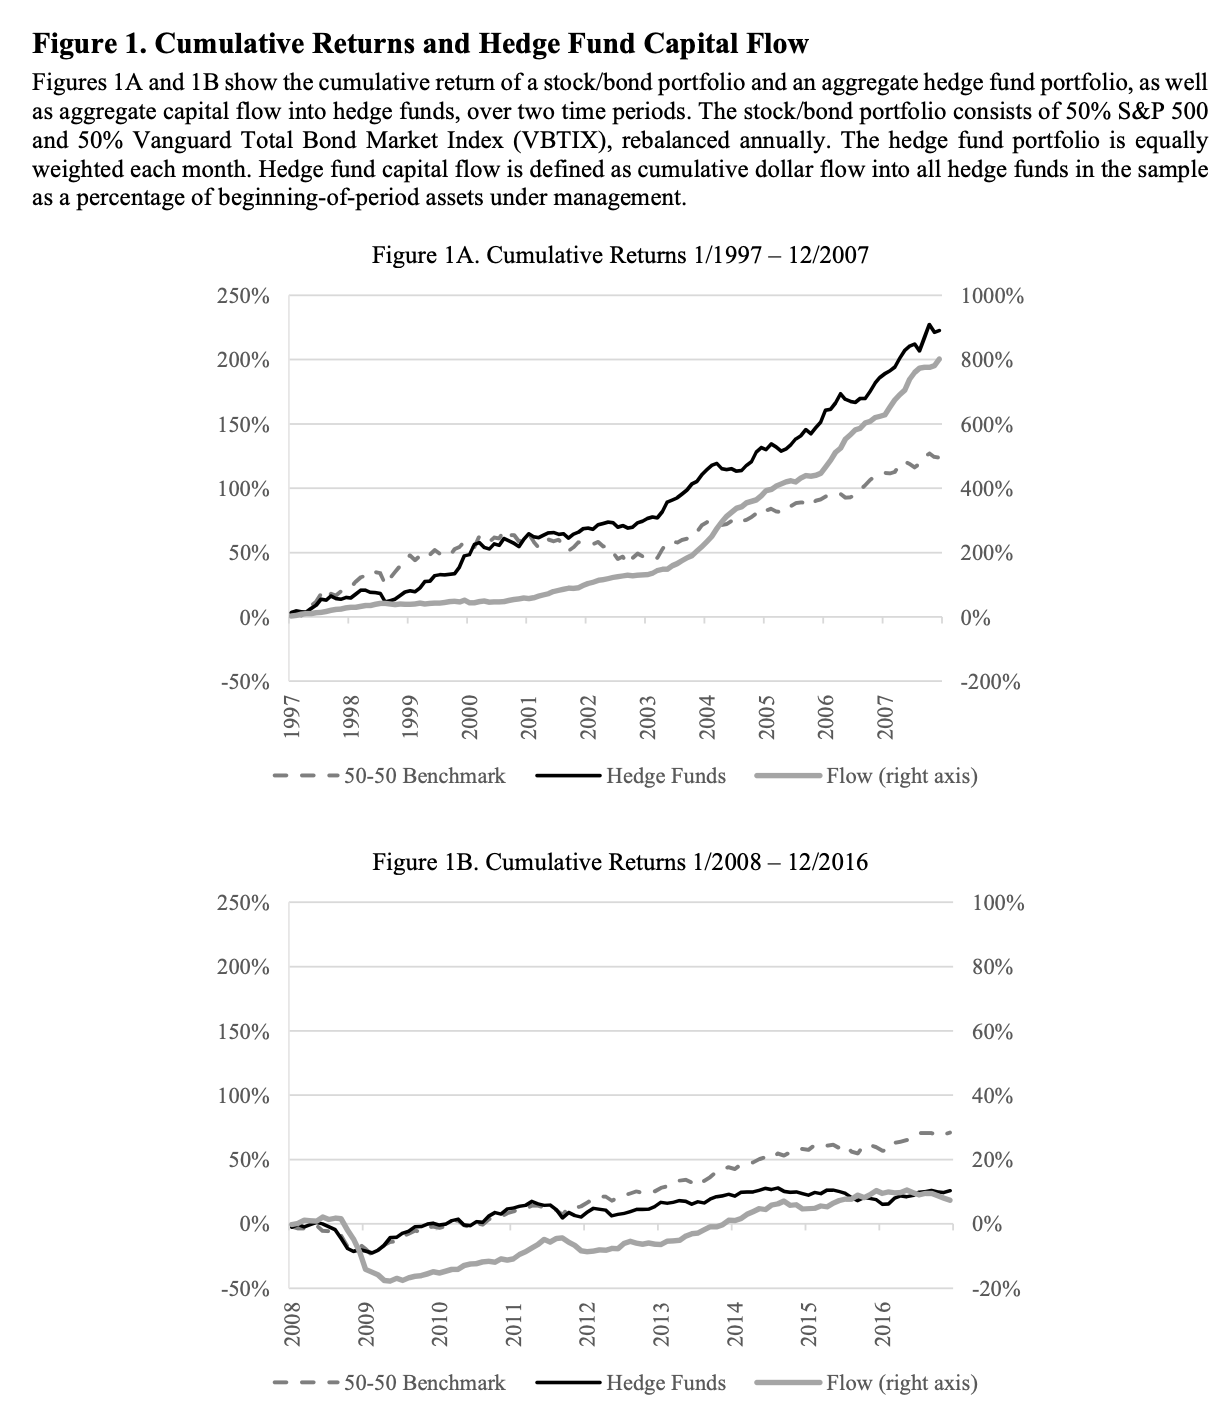 Hedge fund performance was much better prior to 2008. The past decade or so has been tough. Source: [Bollen et al. (2020)](https://papers.ssrn.com/sol3/papers.cfm?abstract_id=3034283&download=yes)